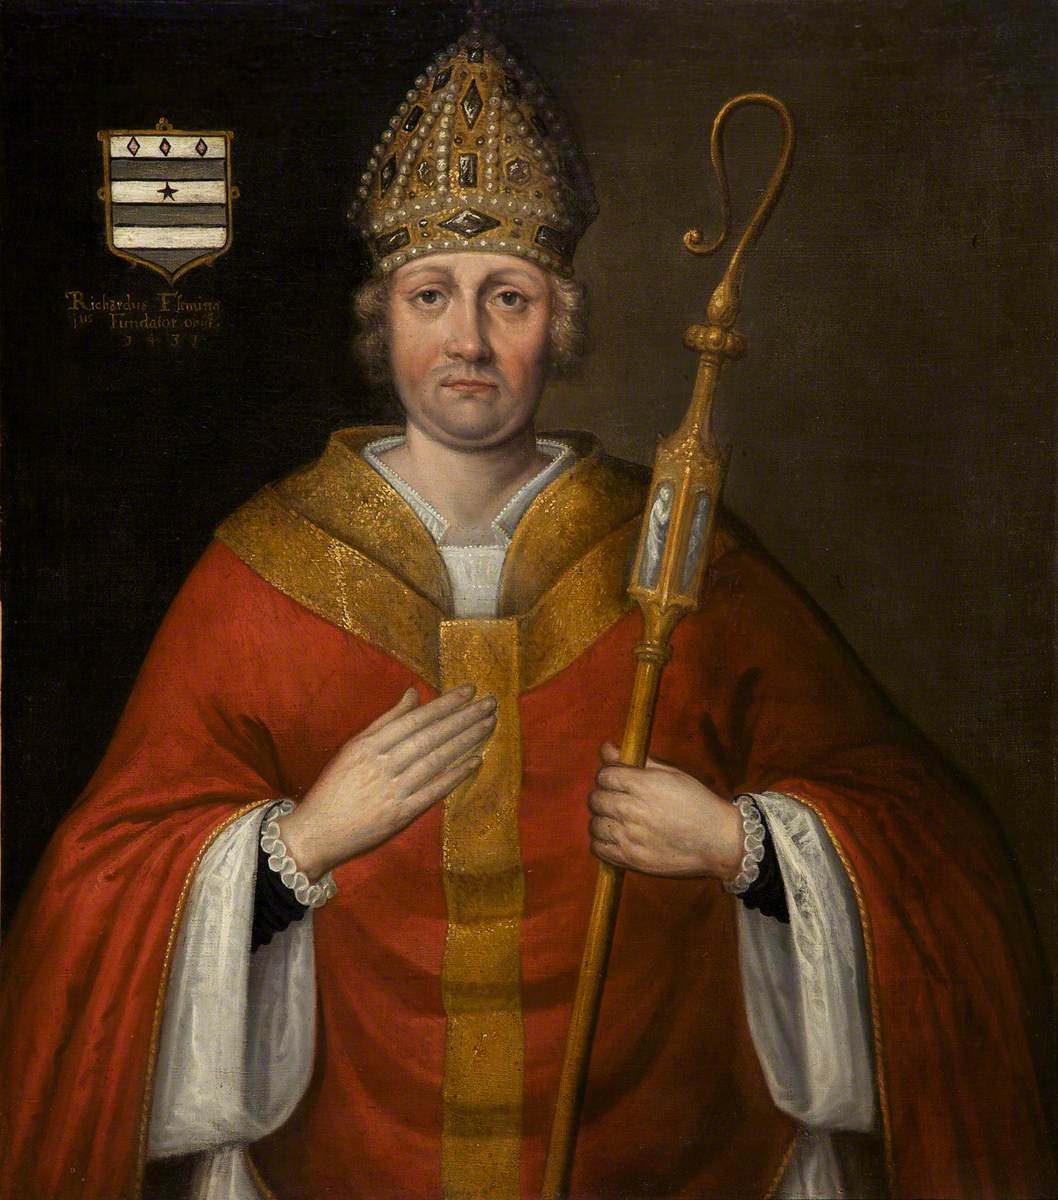 Richard Fleming (c.1385–1431), Bishop of Lincoln (1420–1431), Founder of Lincoln College